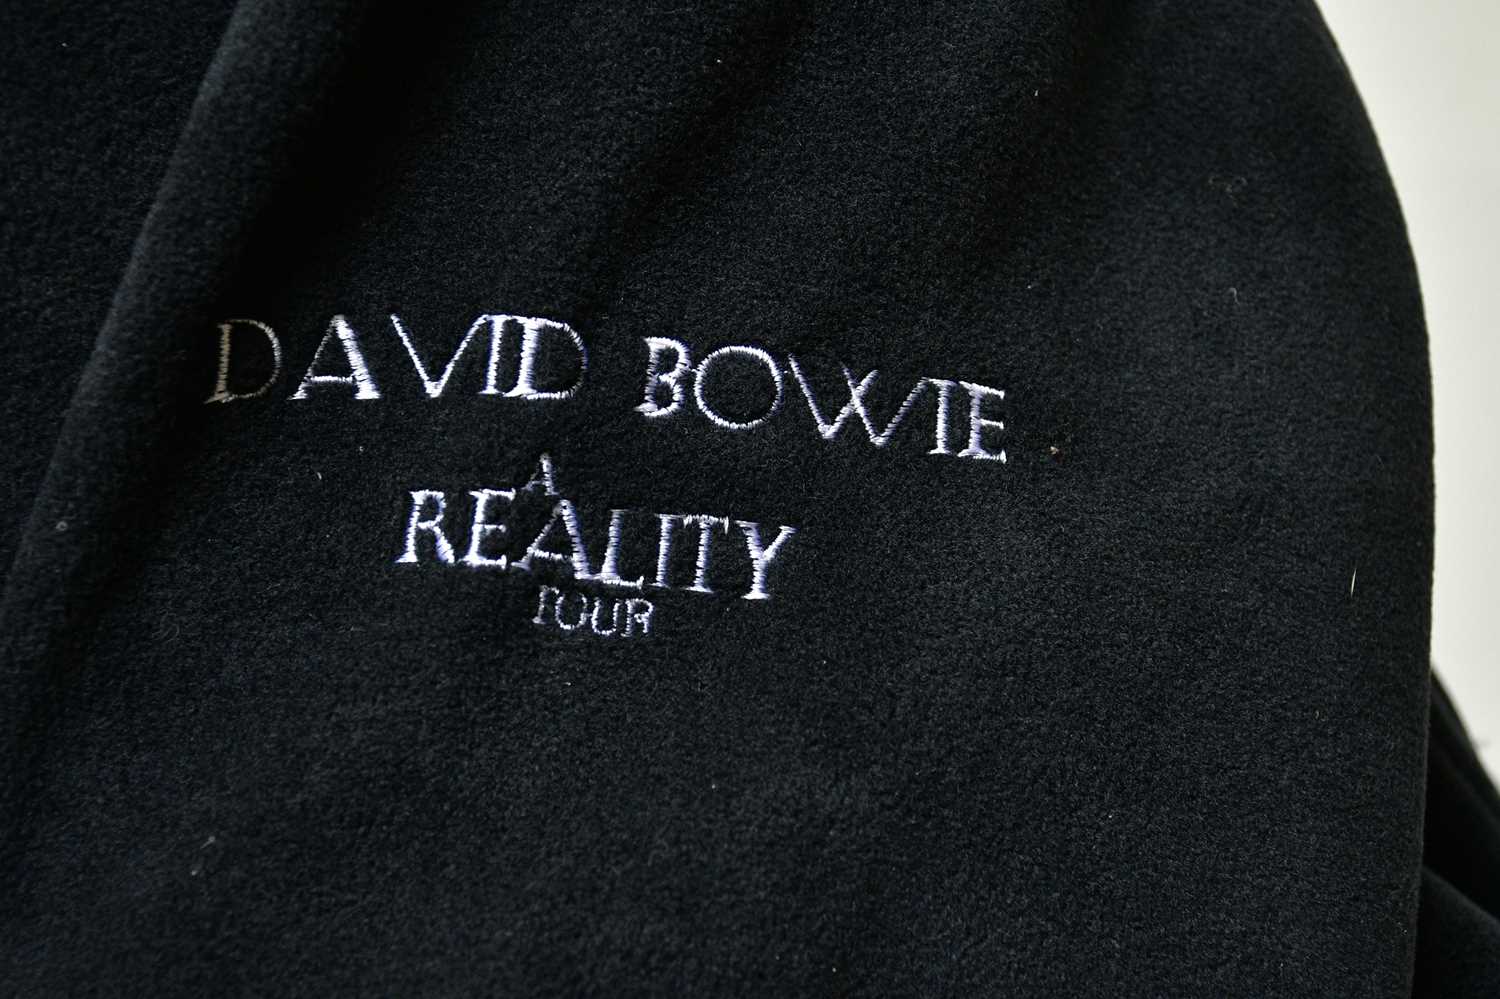 DAVID BOWIE; a stage crew 'A Reality Tour' jacket. - Image 4 of 5